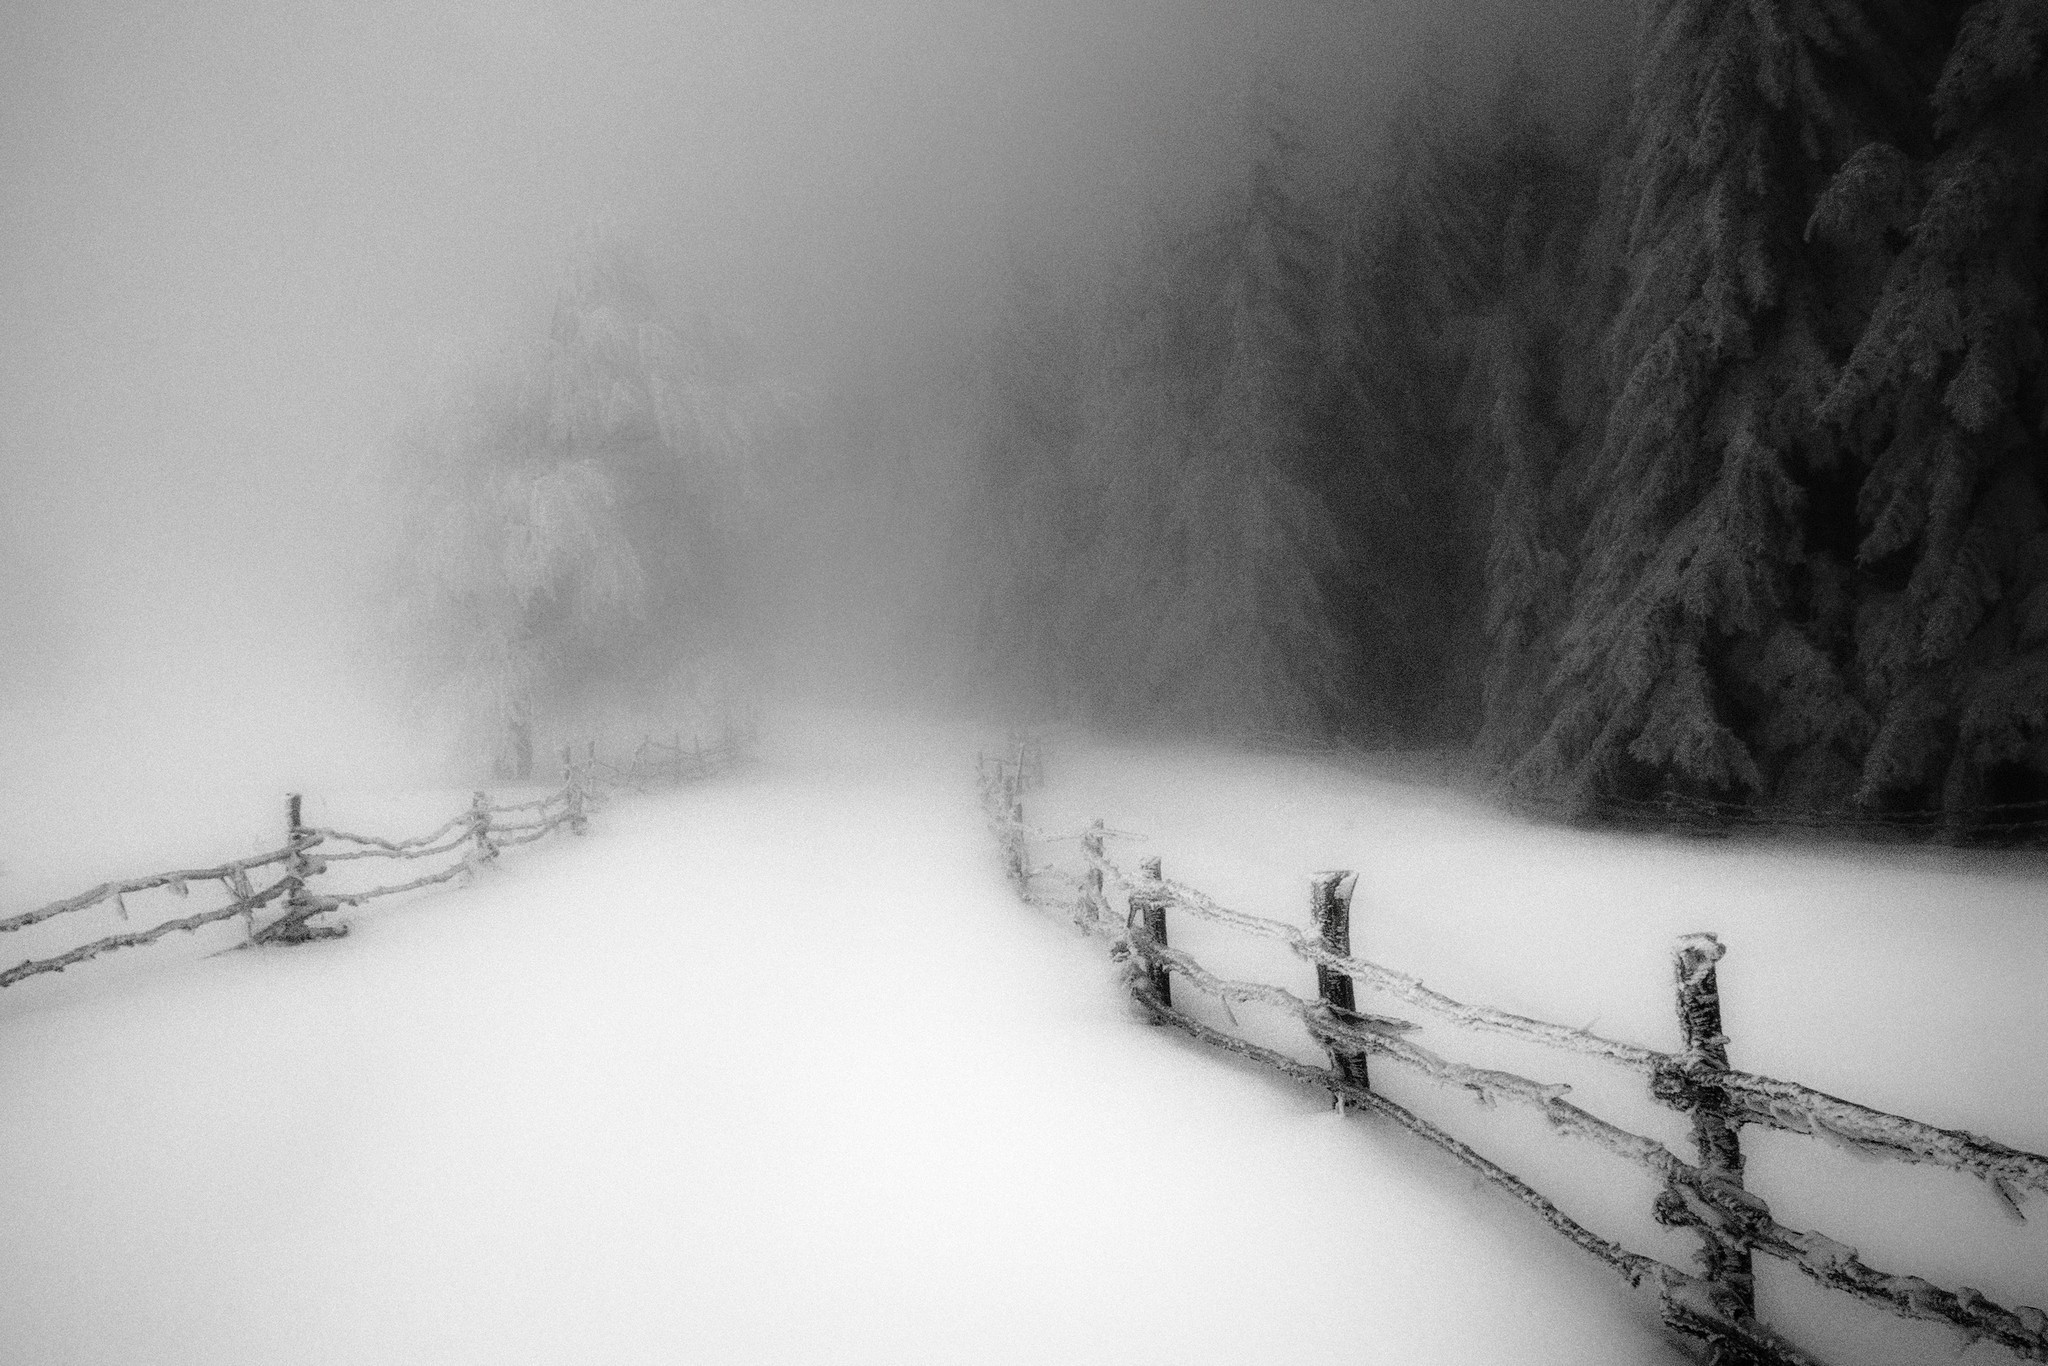 landscape, Nature, Winter, Morning, Snow, Forest, Fence, Cold, Monochrome, Road, Path, Trees, Daylight, Mist Wallpaper